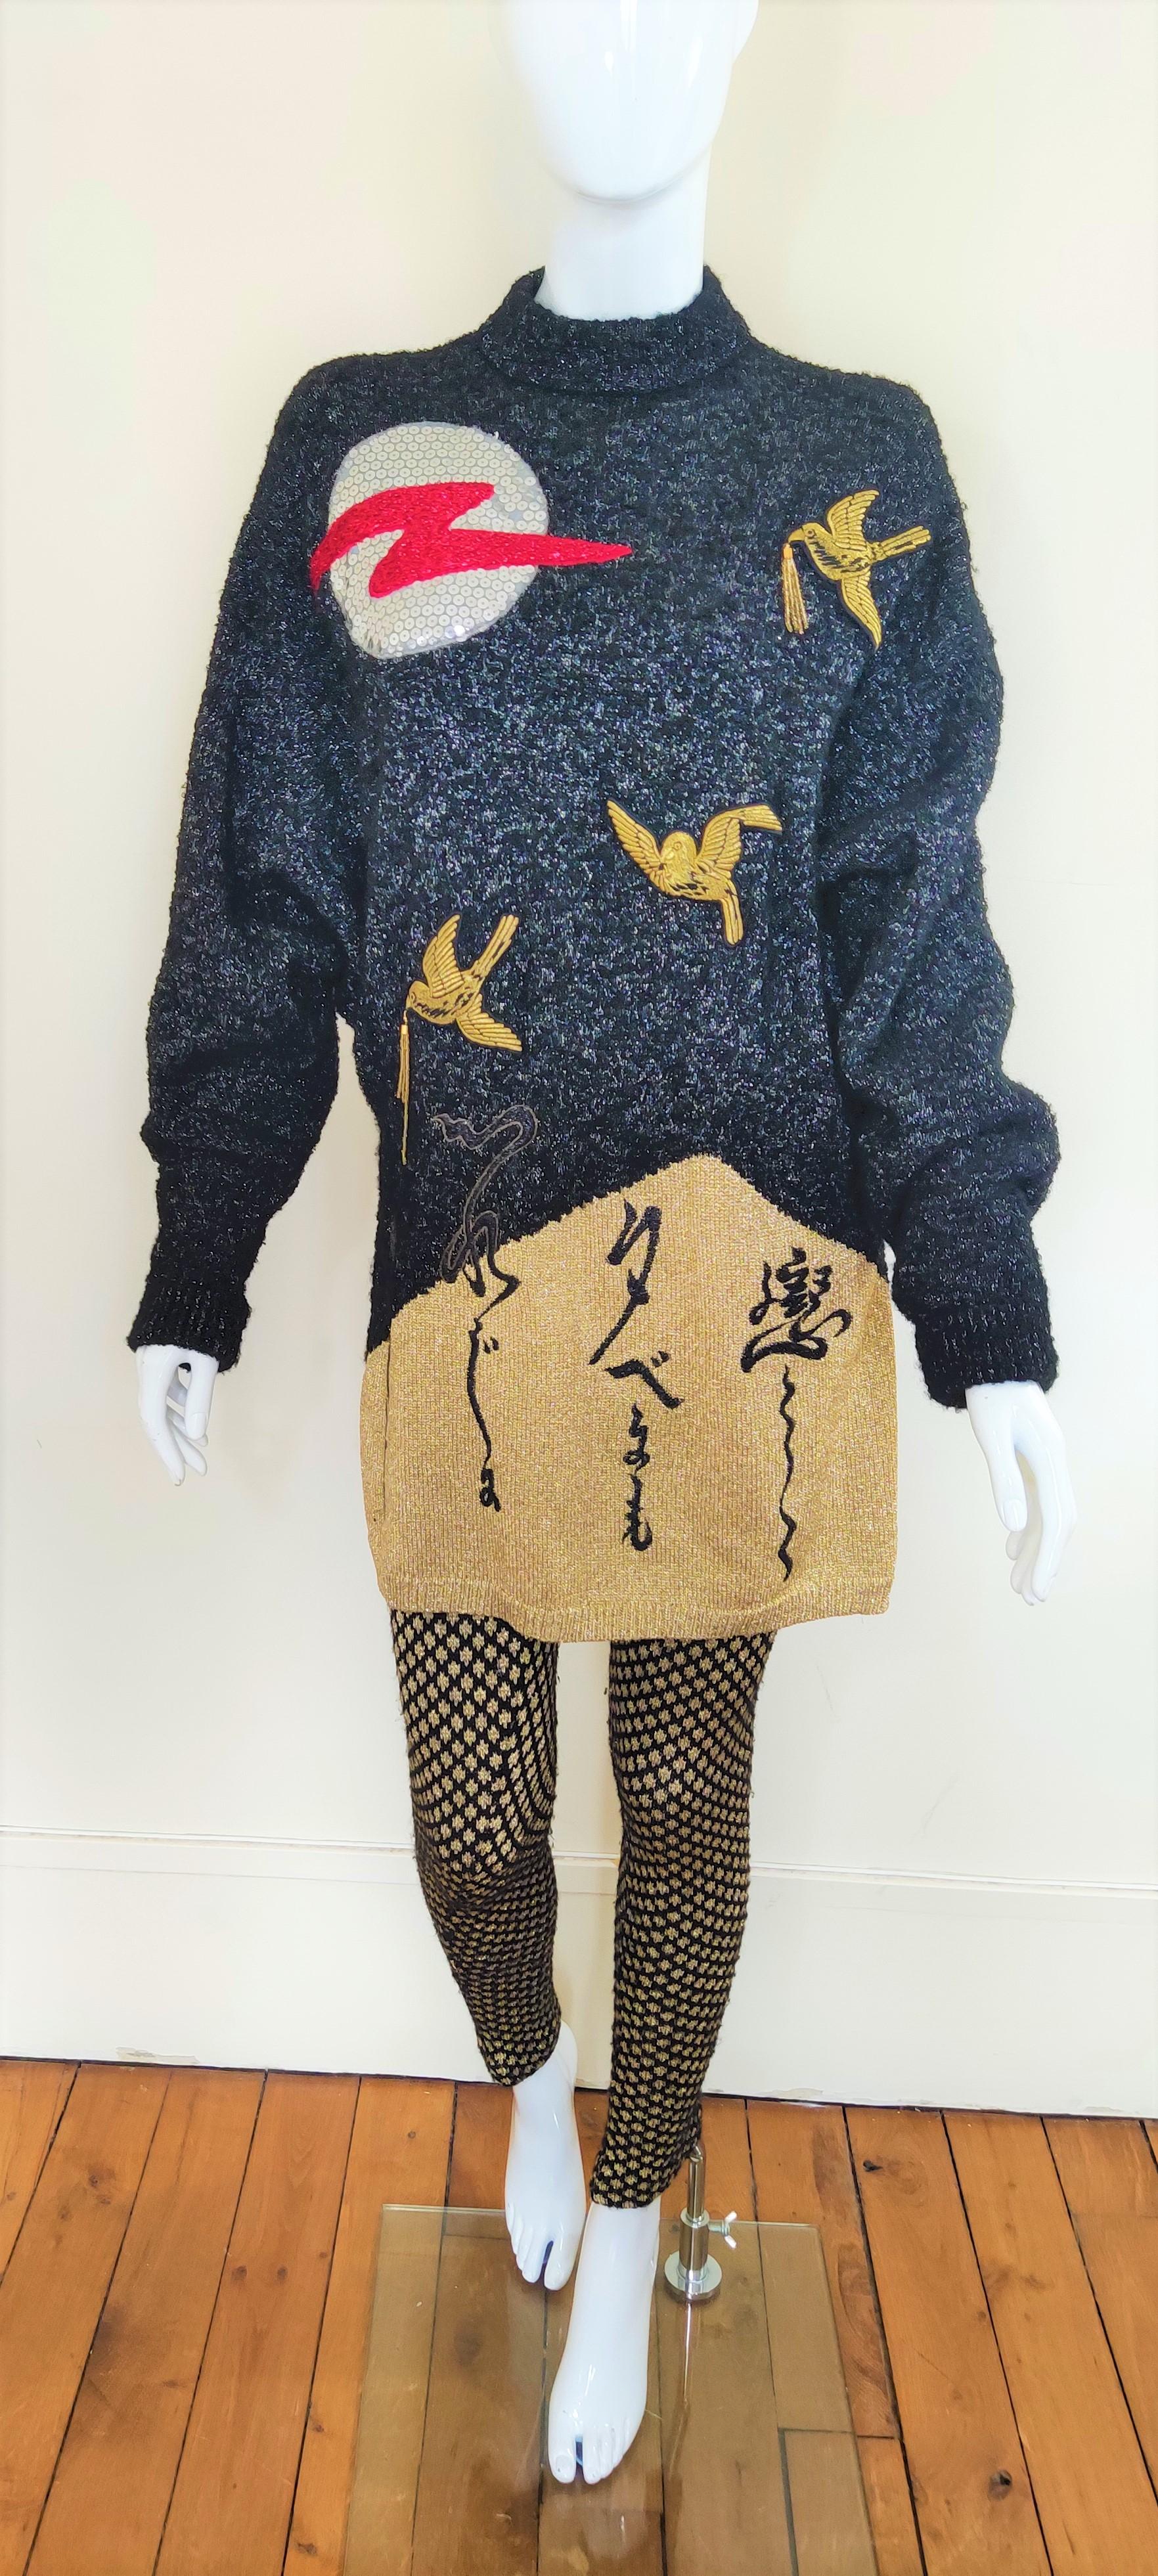 RARE set by Kansai Yamamoto!
Dress/pullover + pants.
Pattern: night with red moon and birds. 2 of the birds carry golden perls. The moon is made by glitters. 
Lurex look. Fabric: wool, yarn, nylon.
Metalic effect.  

VERY GOOD condition!

SIZE
Men: